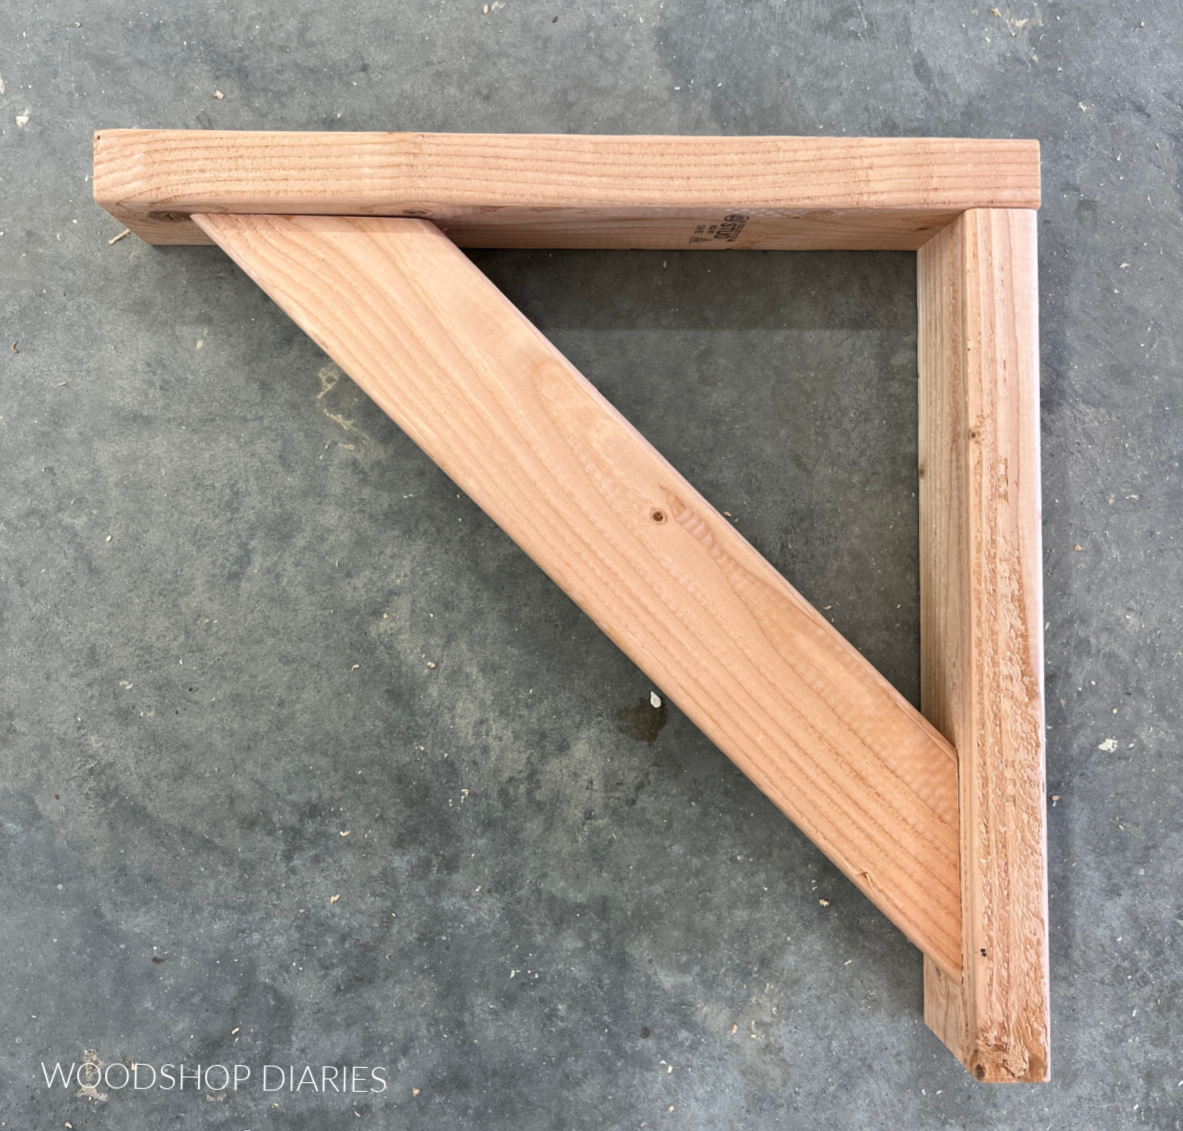 Triangle shaped shelf support assembled on concrete floor